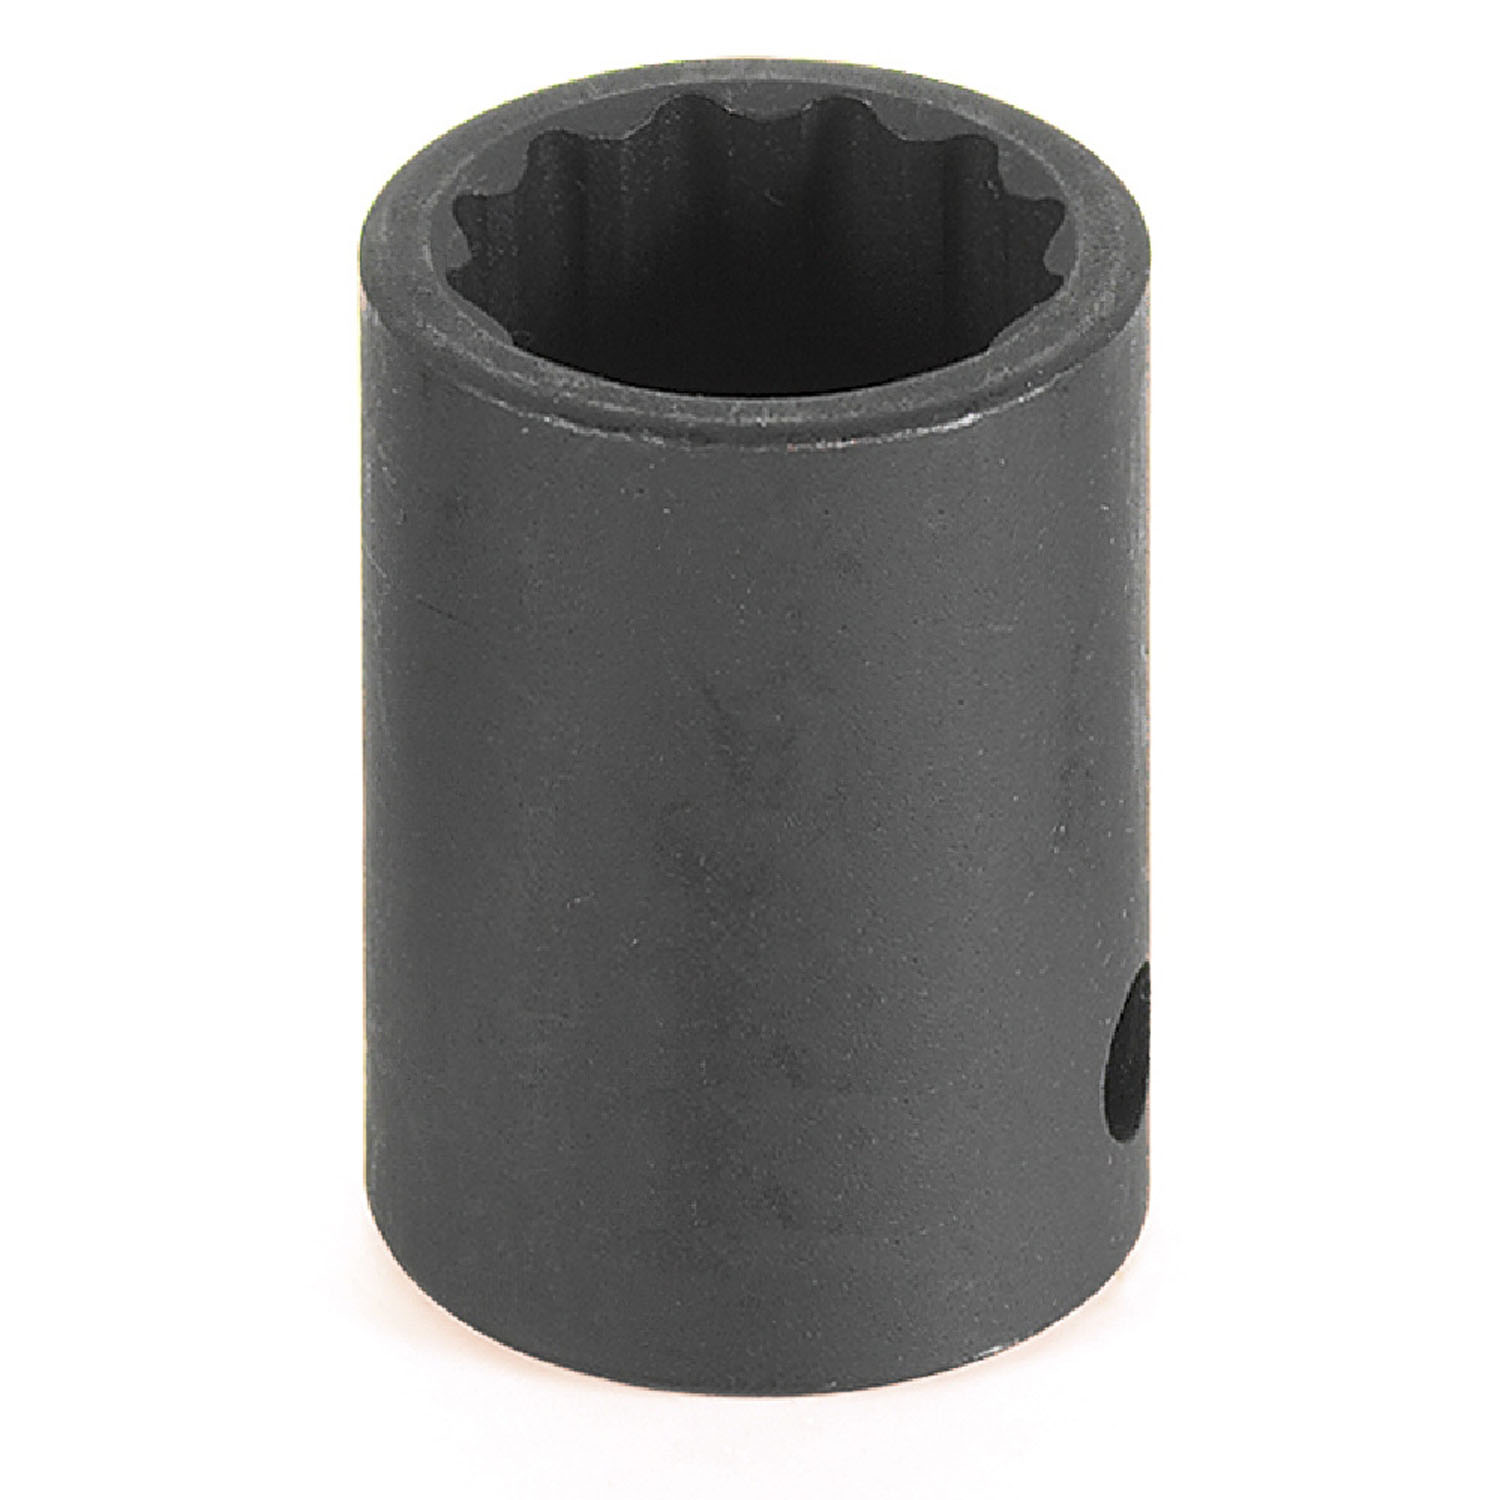 1/2 IN. DRIVE STANDARD LENGTH IMPACT 12 POINT SOCKETS (MULTIPLE SIZES AVAILABLE)